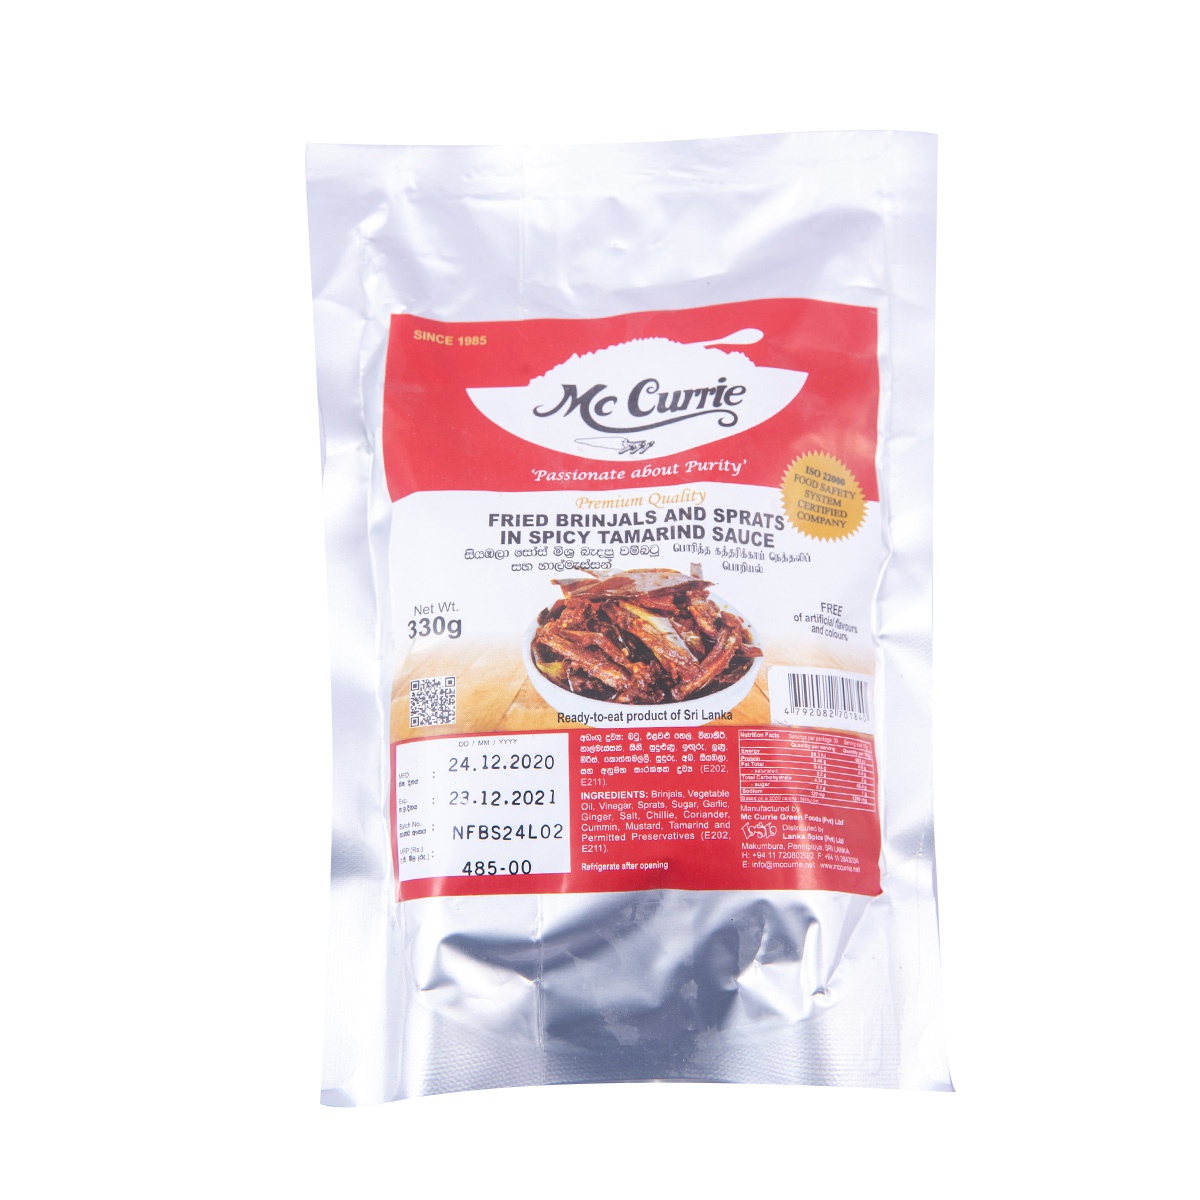 Mccurrie Fried Brinjals And Sprats In Spicy Tamarind Sauce V/P 330G - MCCURRIE - Condiments - in Sri Lanka